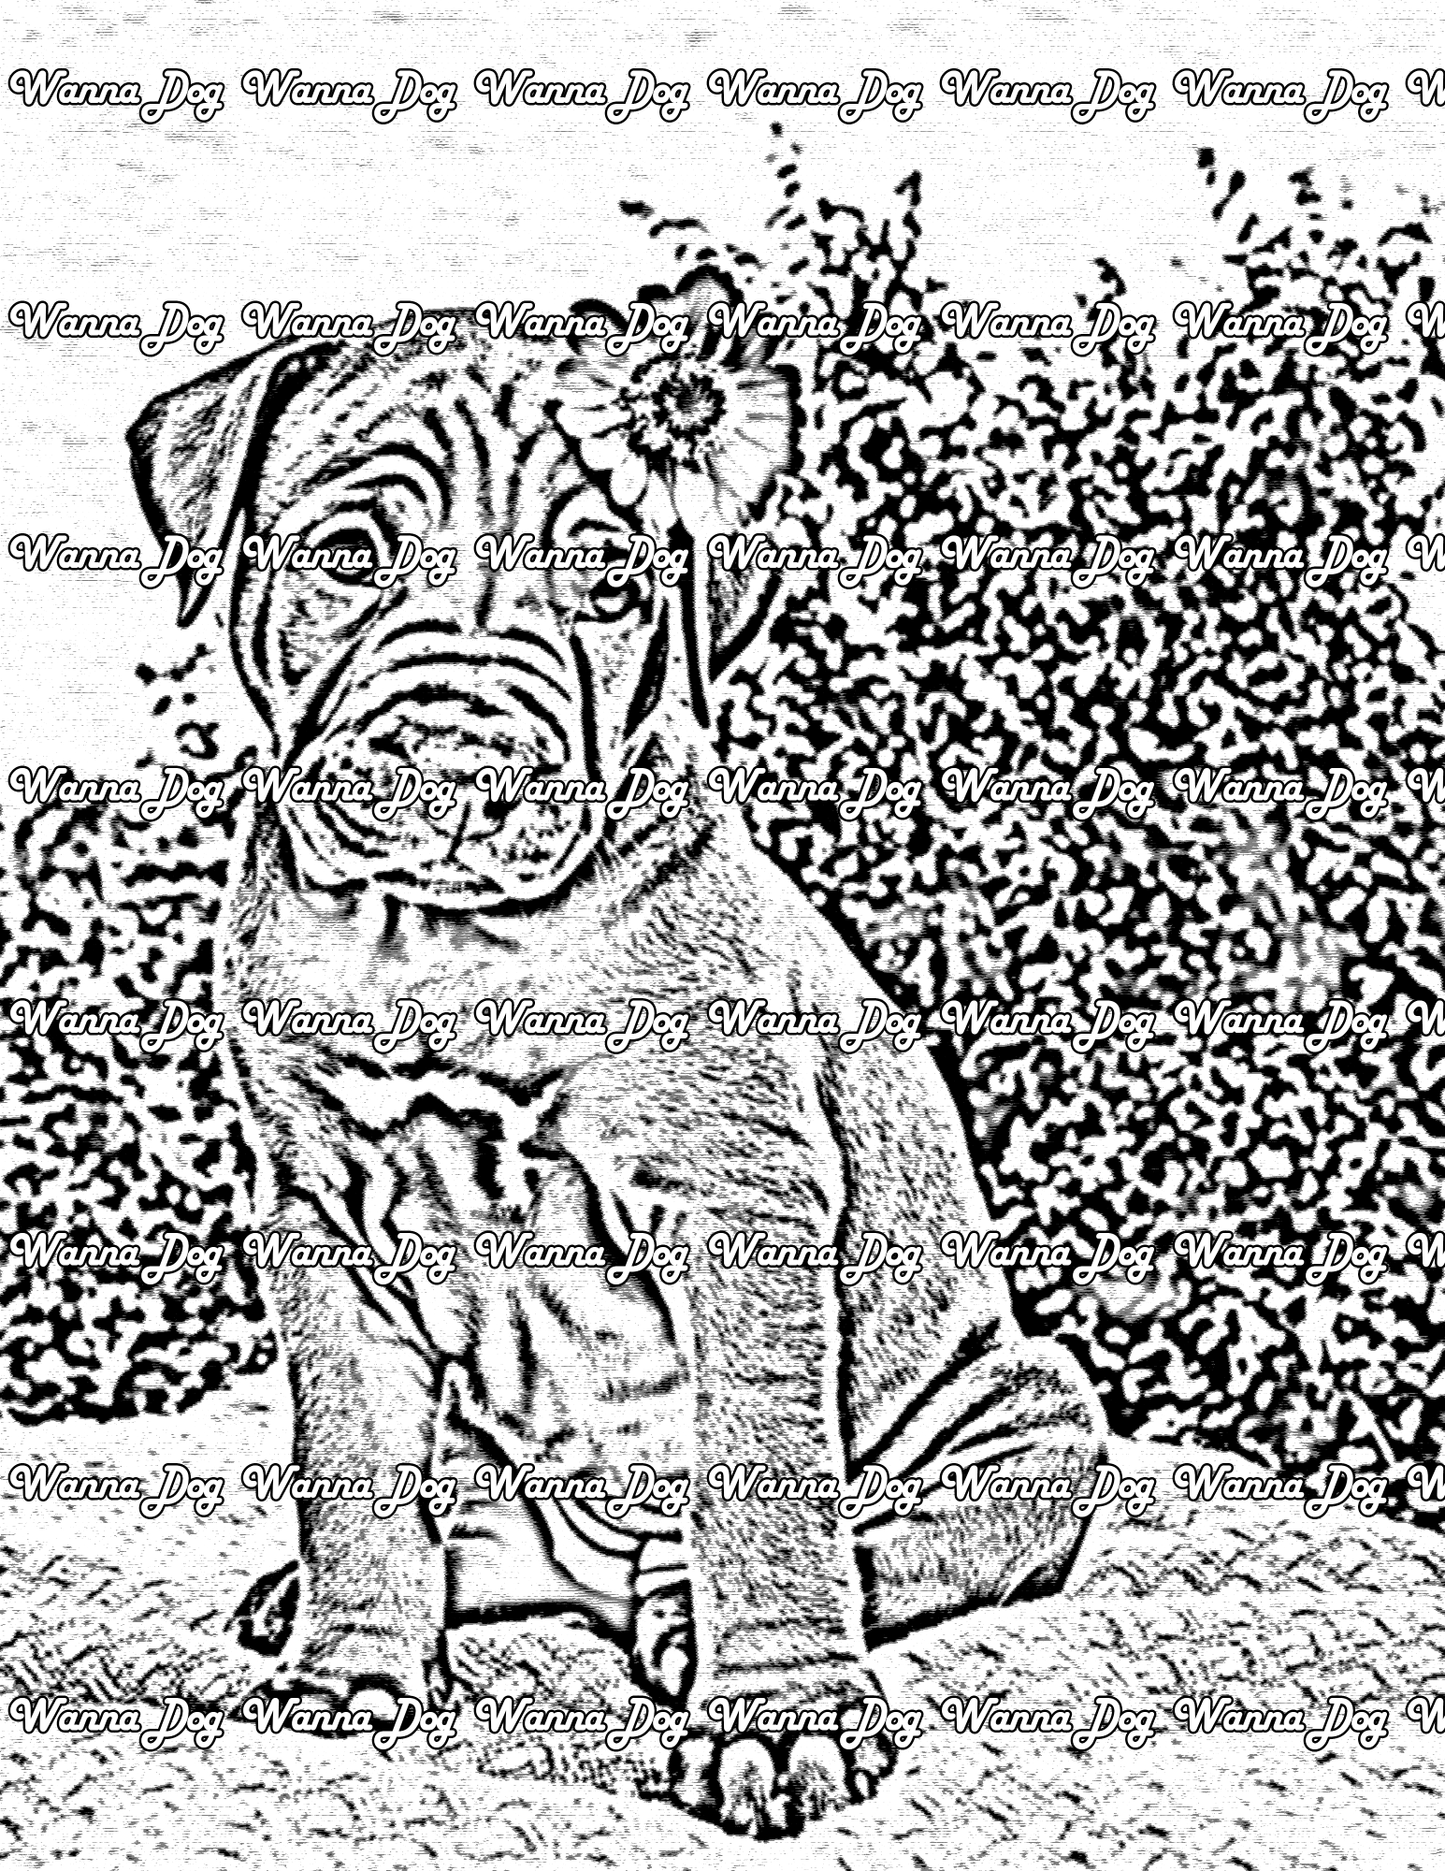 Pitbull Puppy Coloring Page of a Pitbull Puppy with a flower in their ear